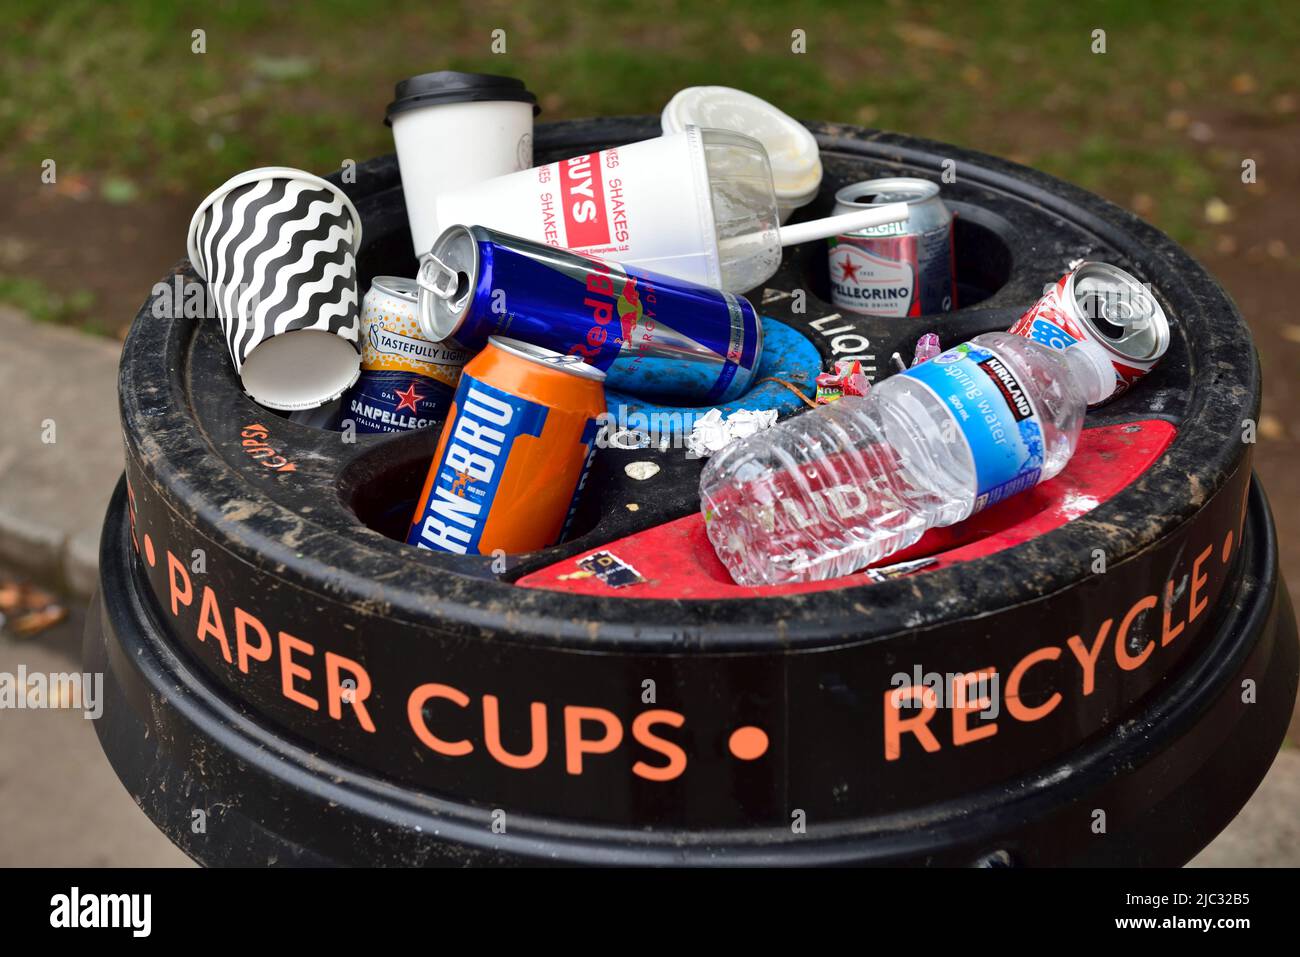 Recycling bin for paper cups filled with can, plastic bottles, along with paper cups Stock Photo